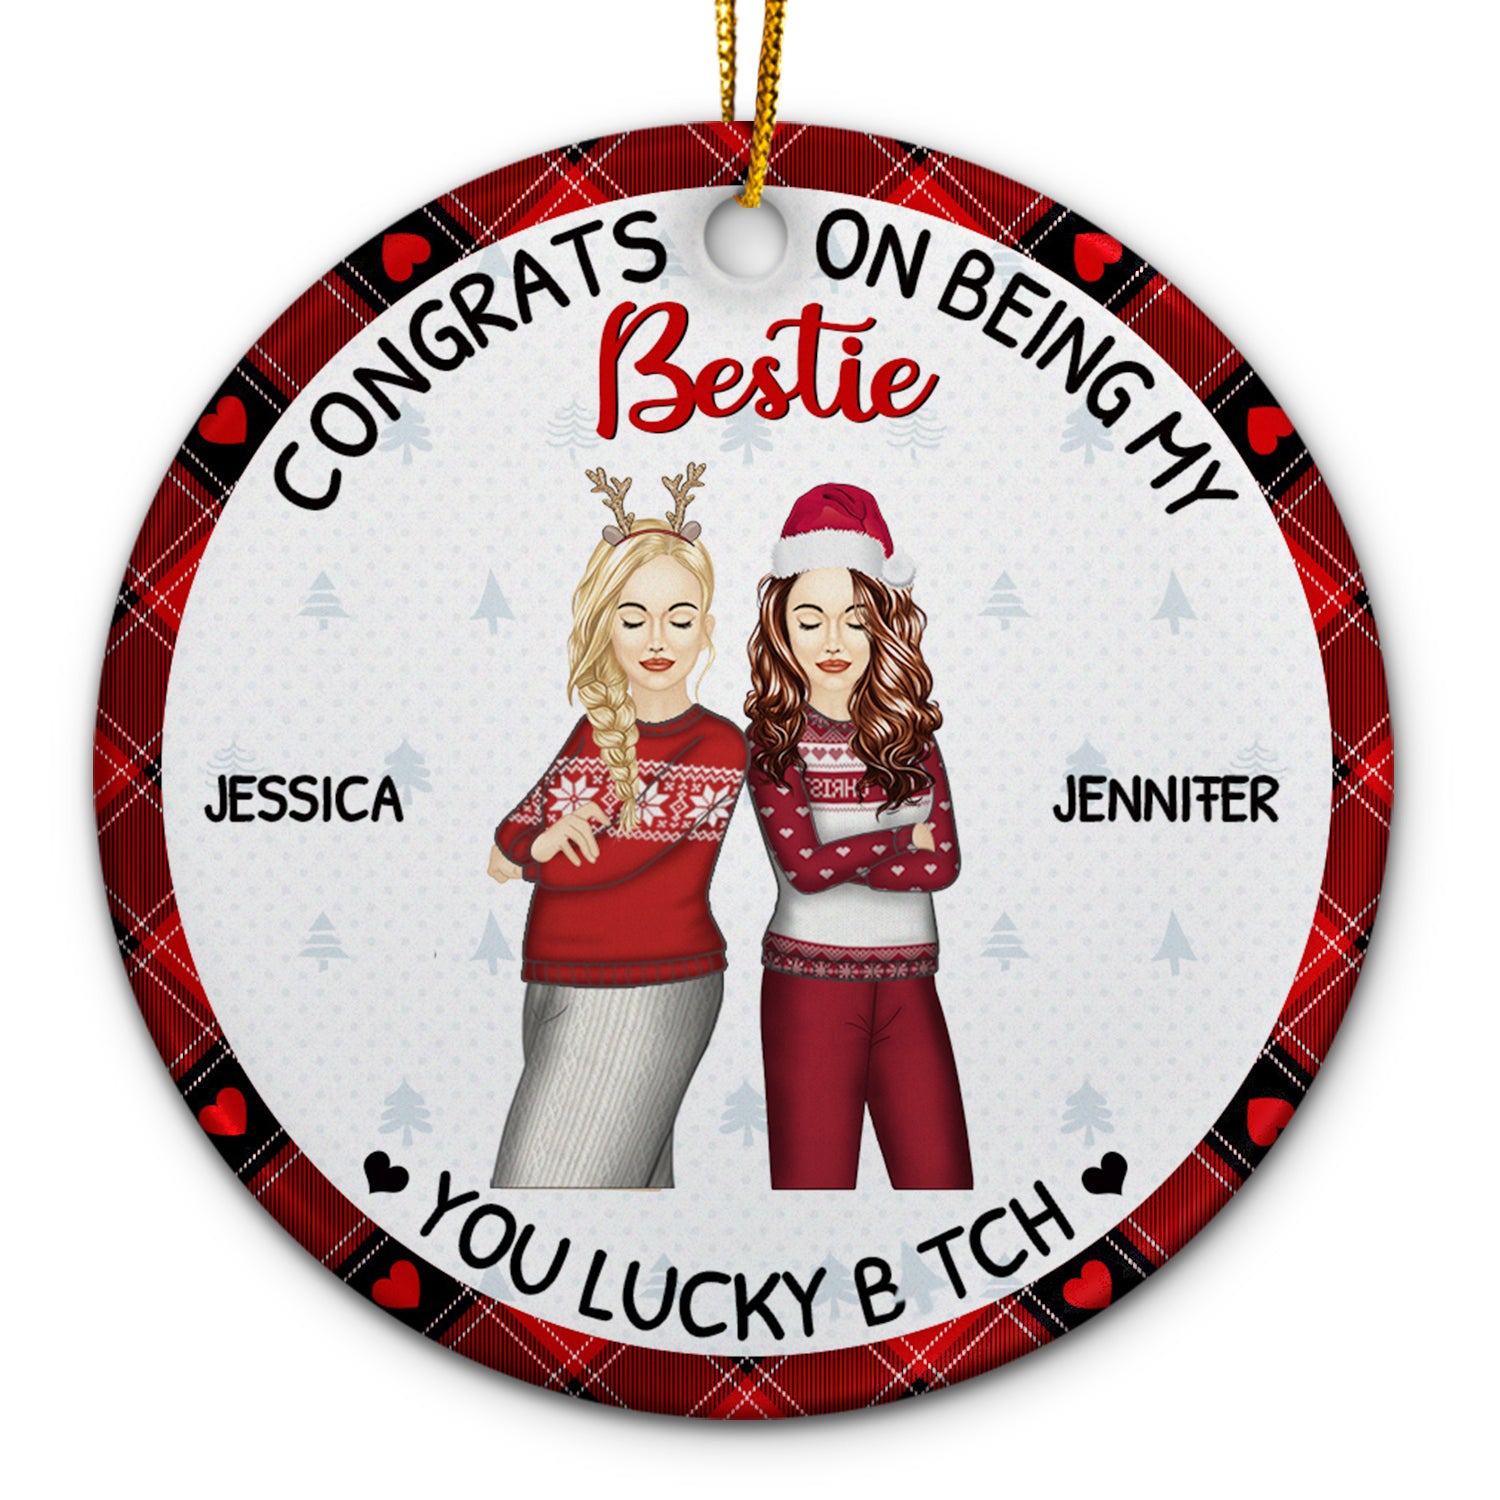 Christmas Fashion Congrats On Being My Bestie - Gift For Bestie - Personalized Circle Ceramic Ornament